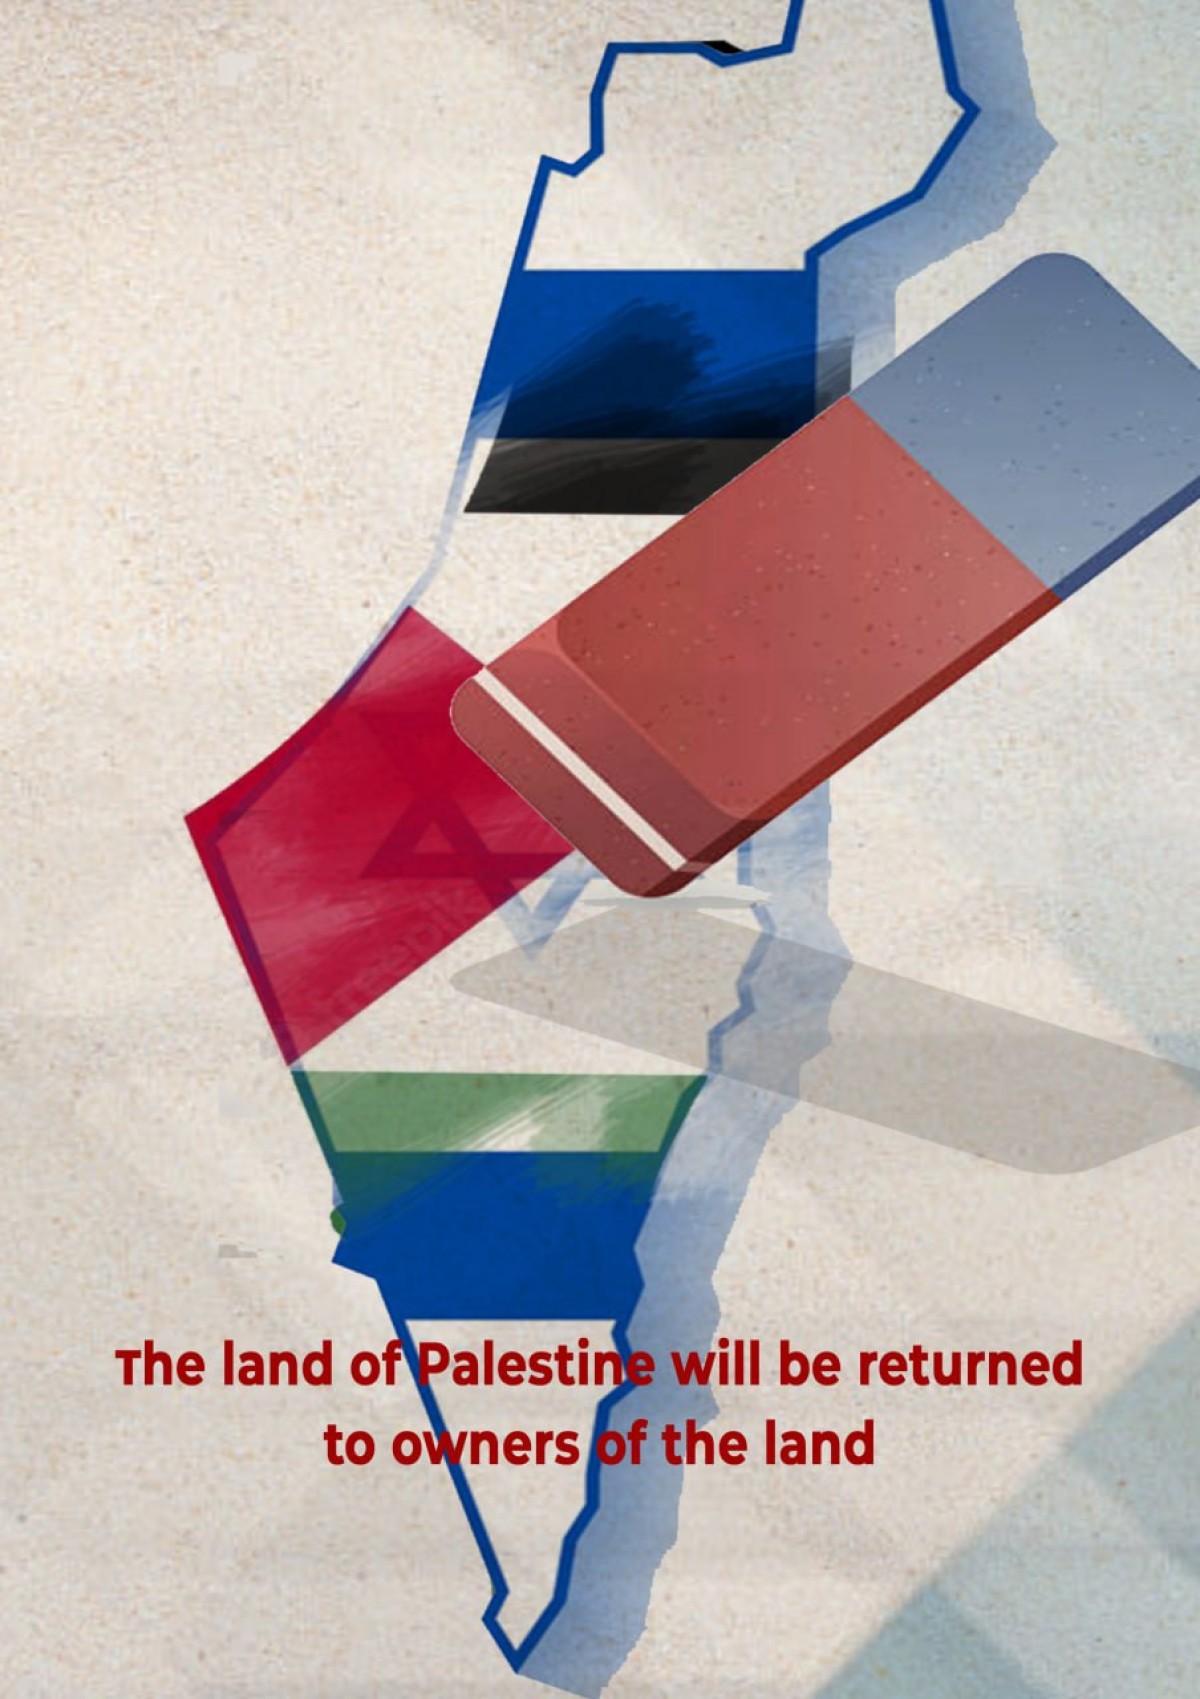 The land of Palestine will be returned to owners of the land